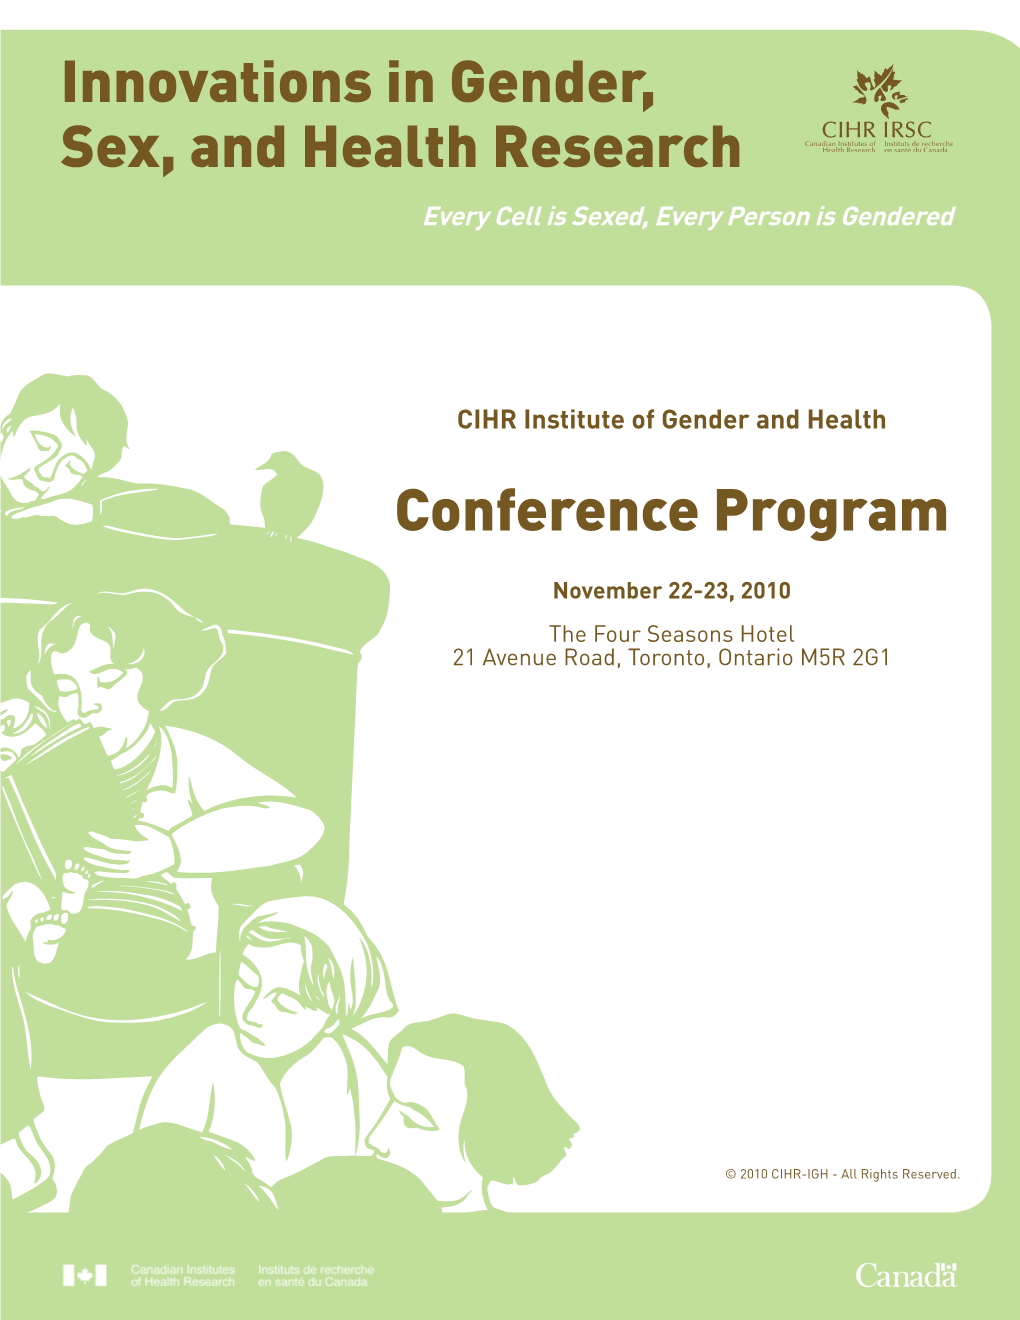 Conference Program Innovations in Gender, Sex, and Health Research